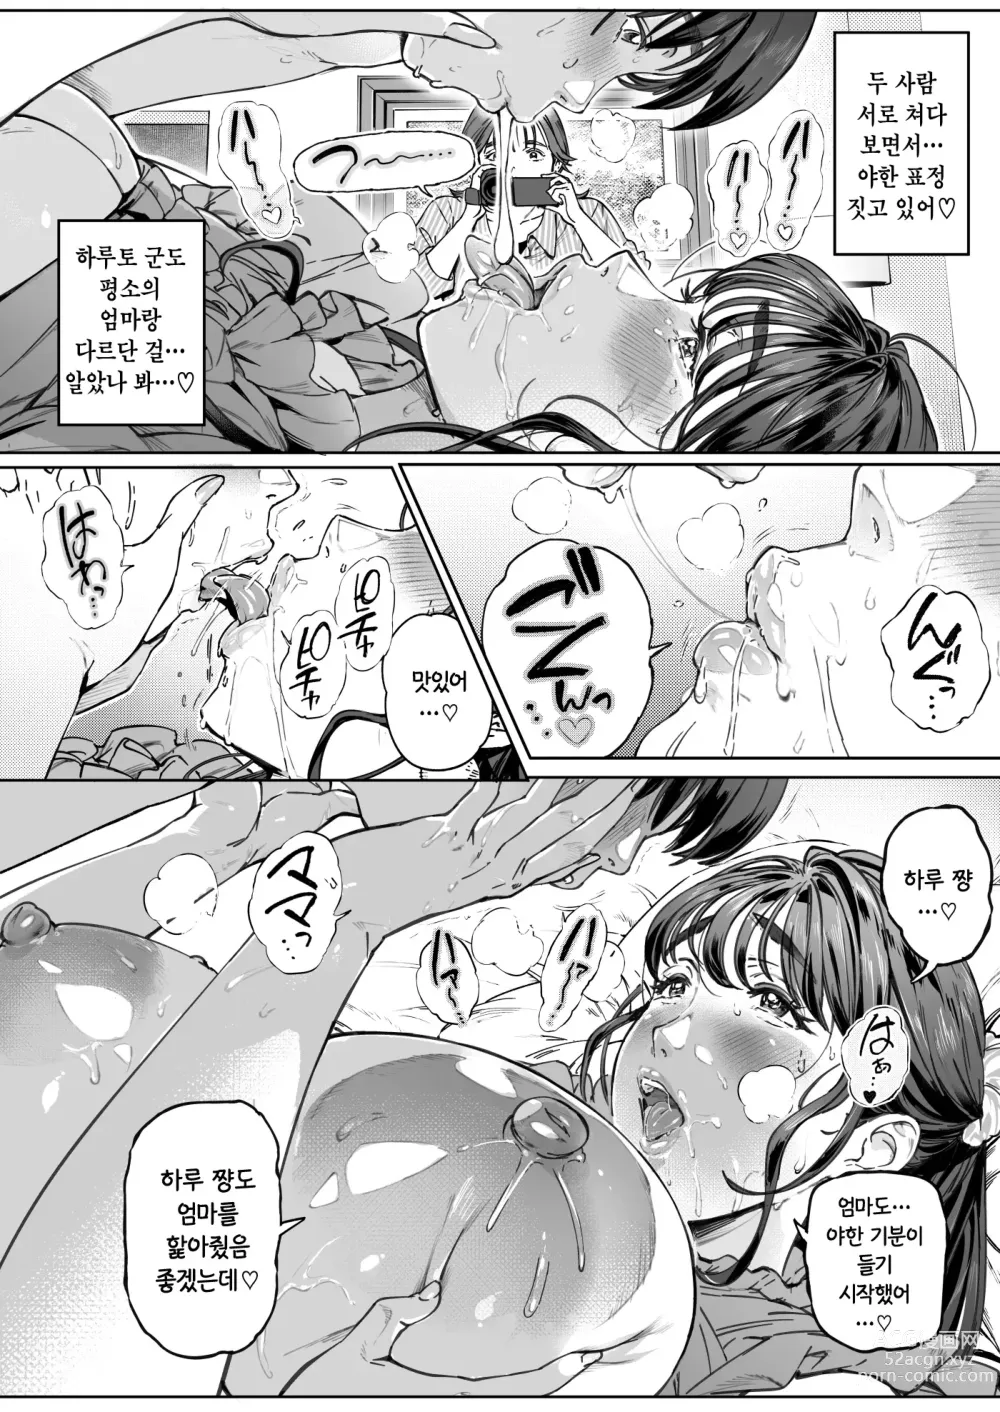 Page 72 of doujinshi 익애 관찰 일기